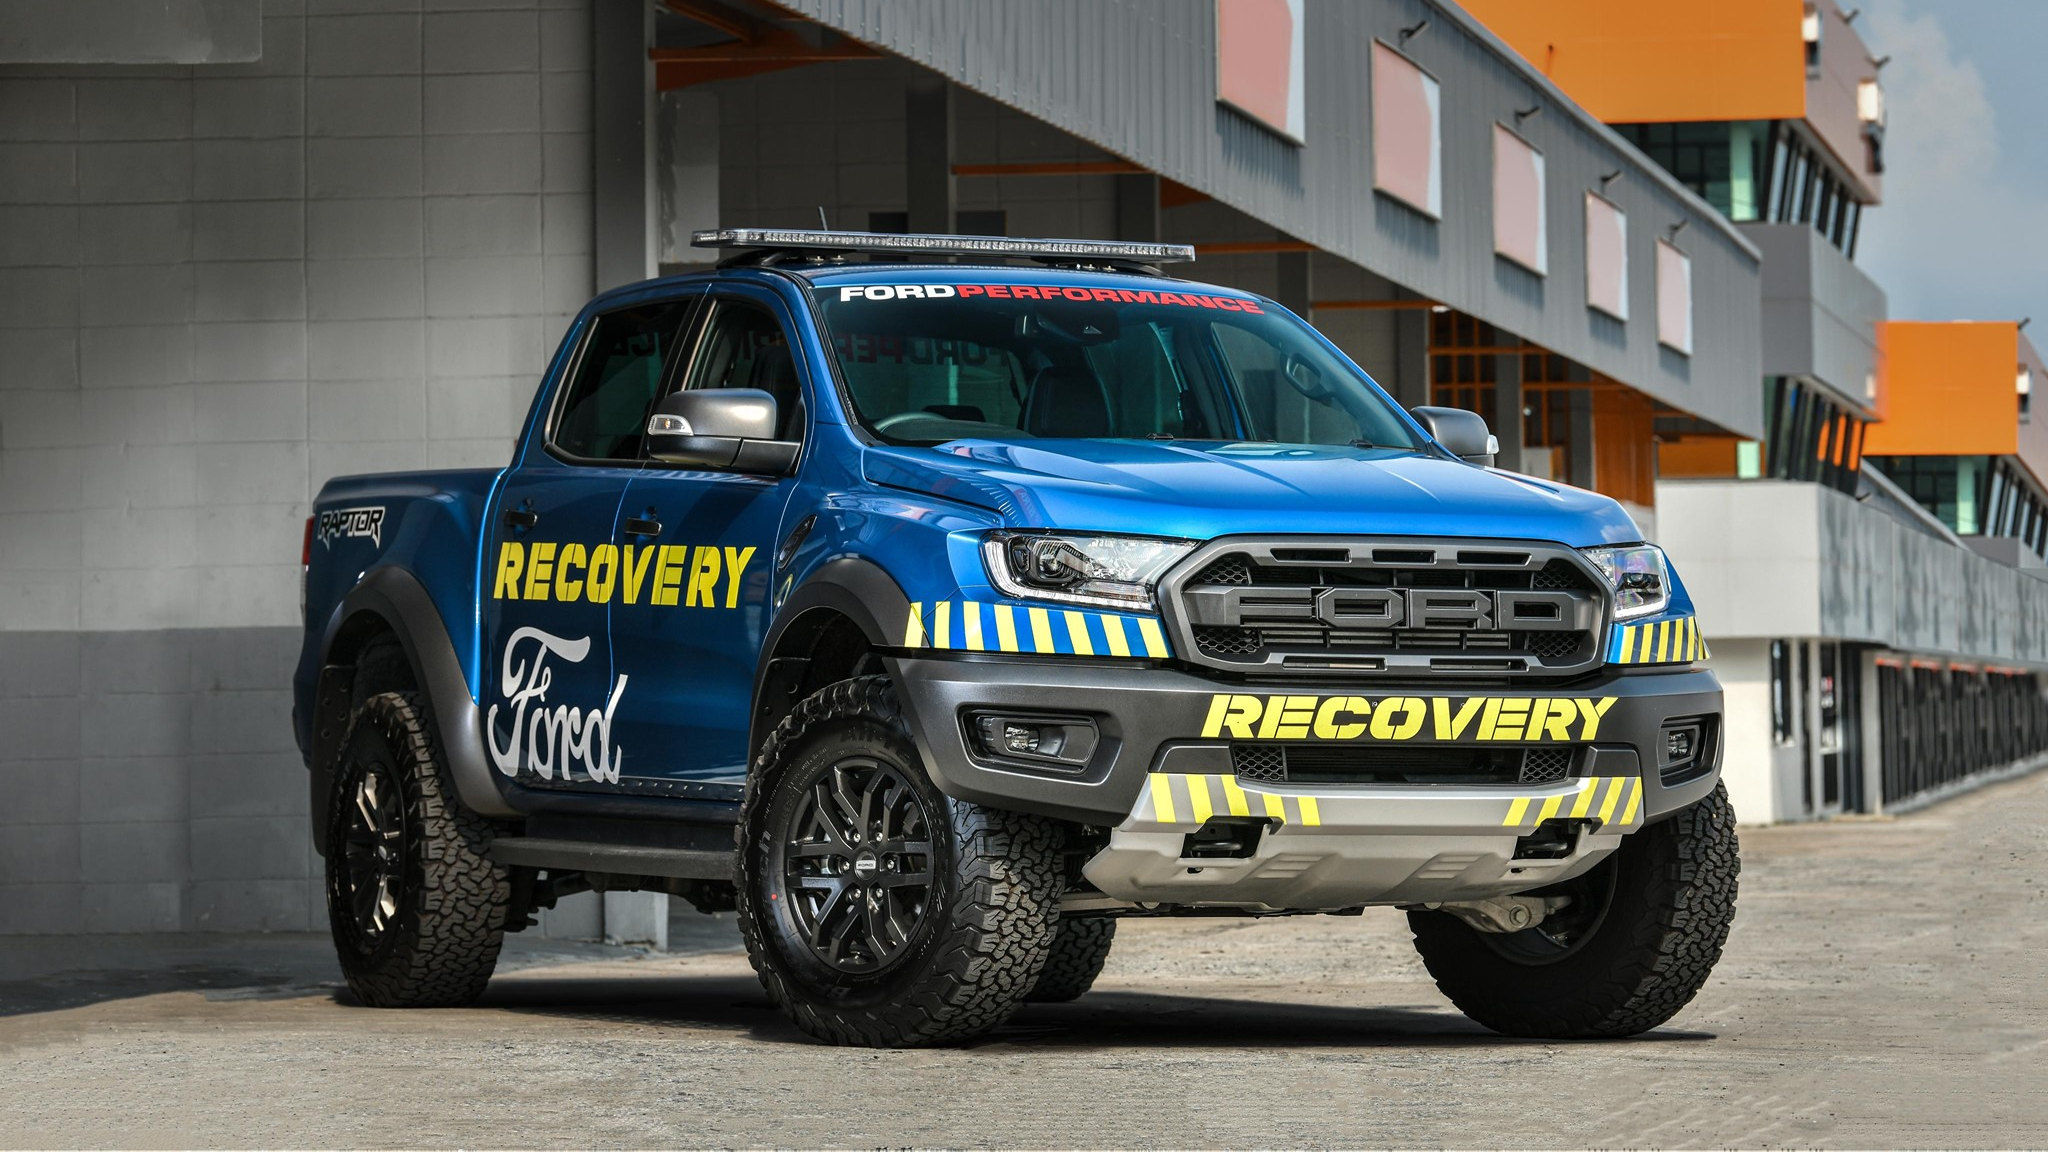 Ford Thailand Racing will debut alongside this Ranger race truck